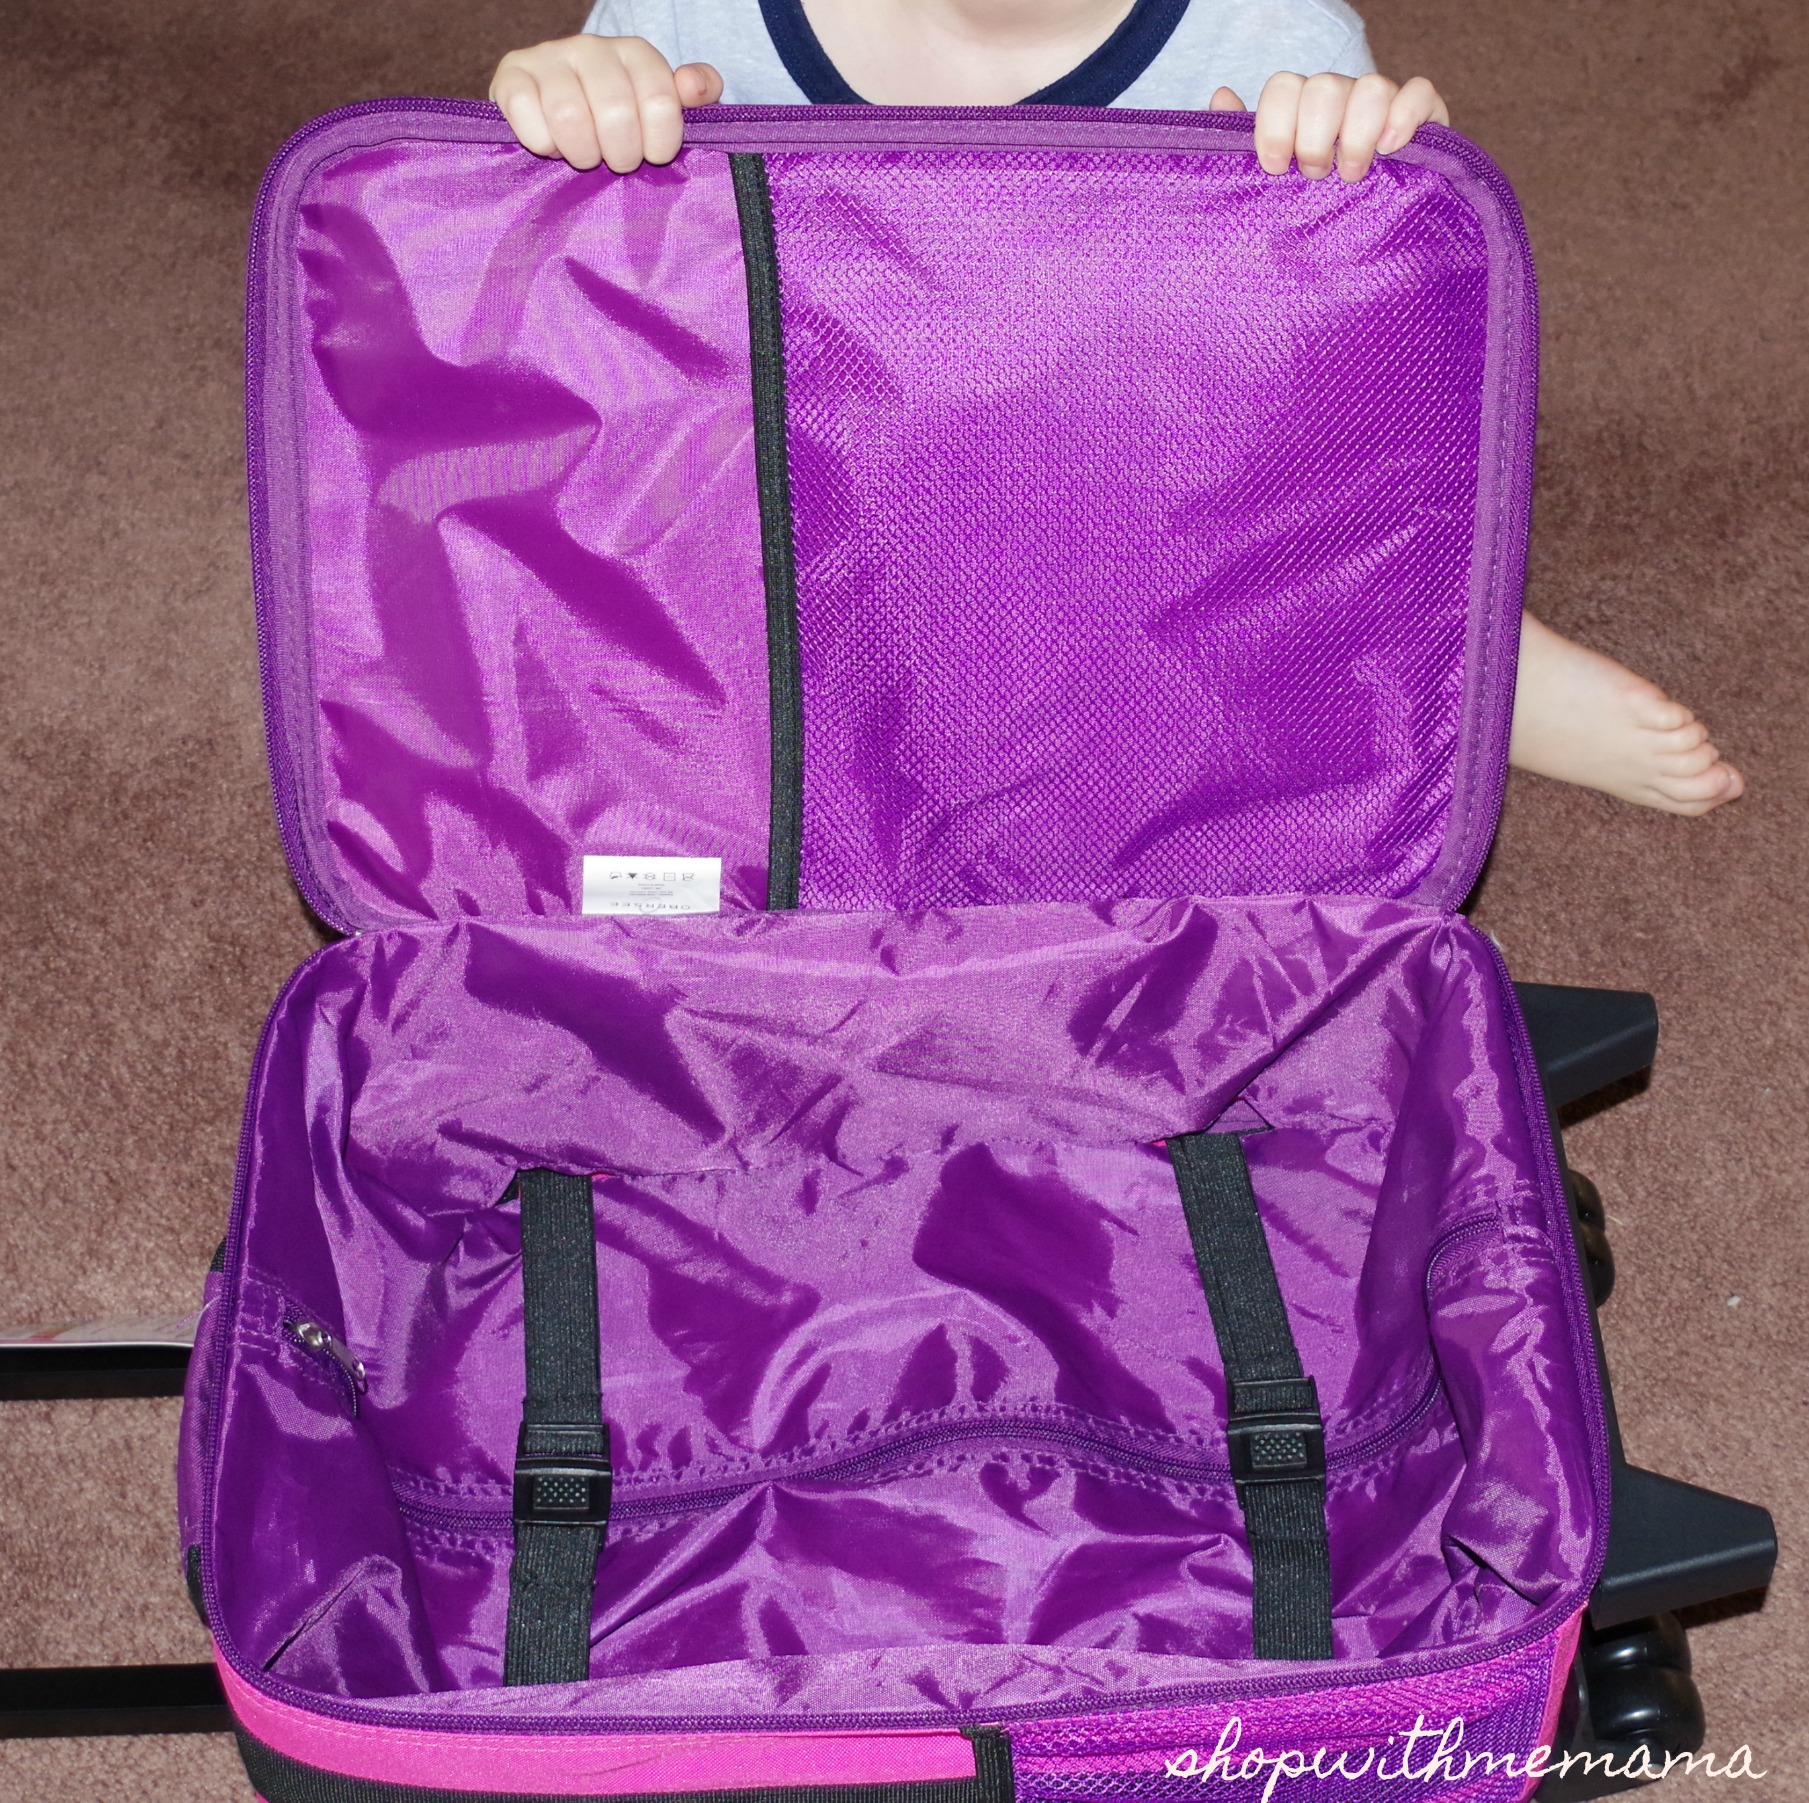 Obersee Kids Luggage Makes Traveling With Kids Fun